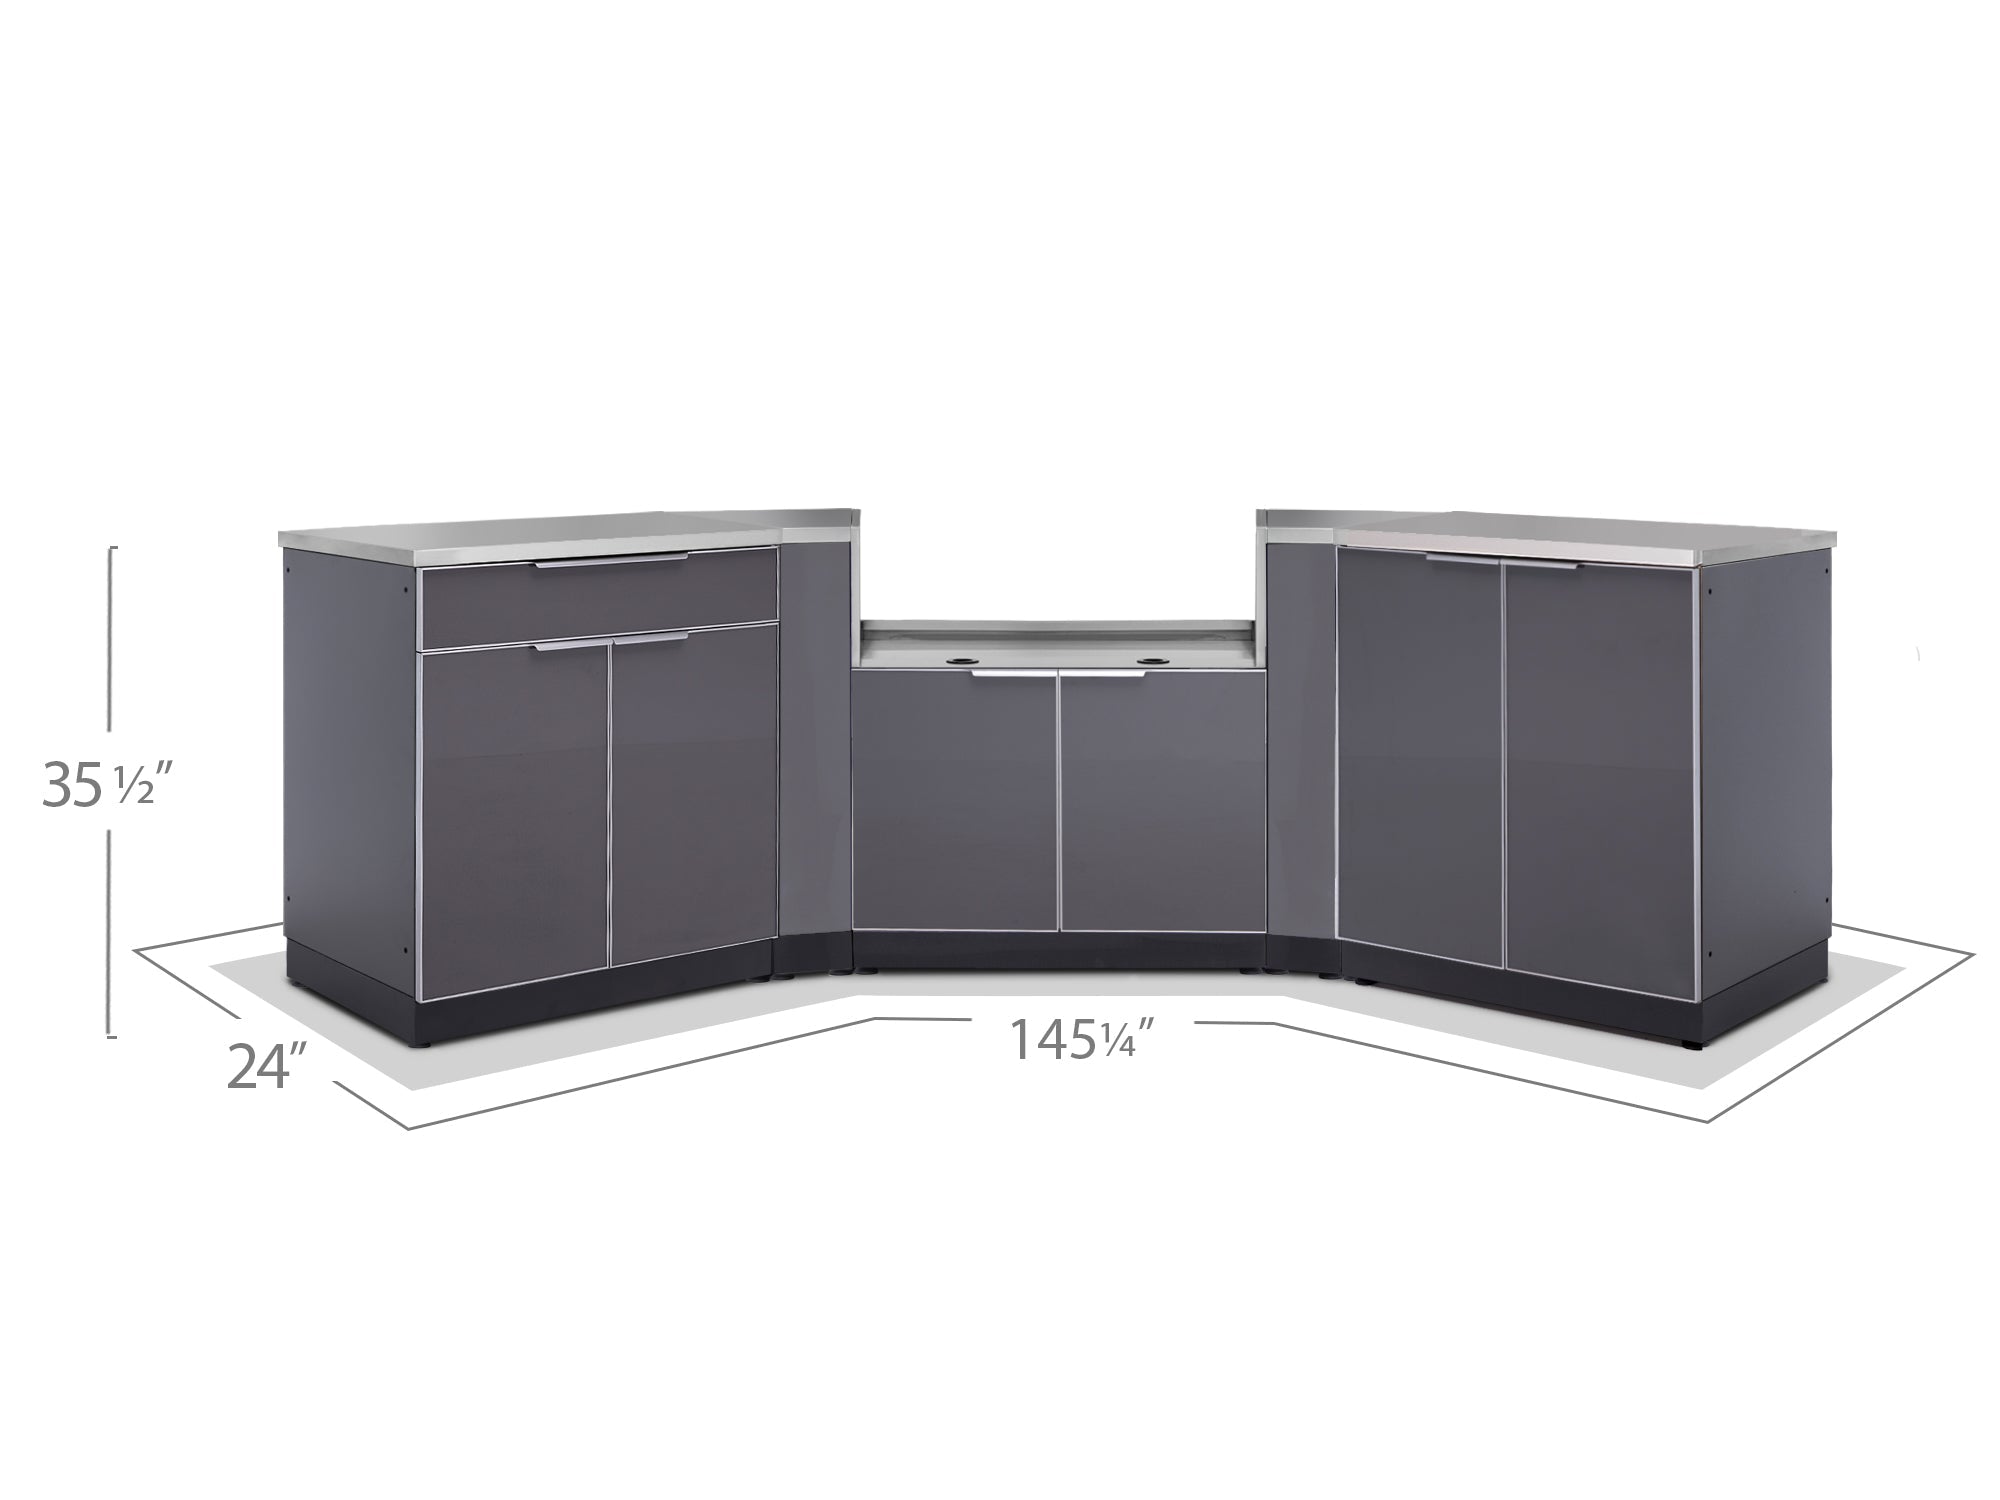 Newage Outdoor Kitchen 4 PC Cabinet Set in Slate Gray - 65285